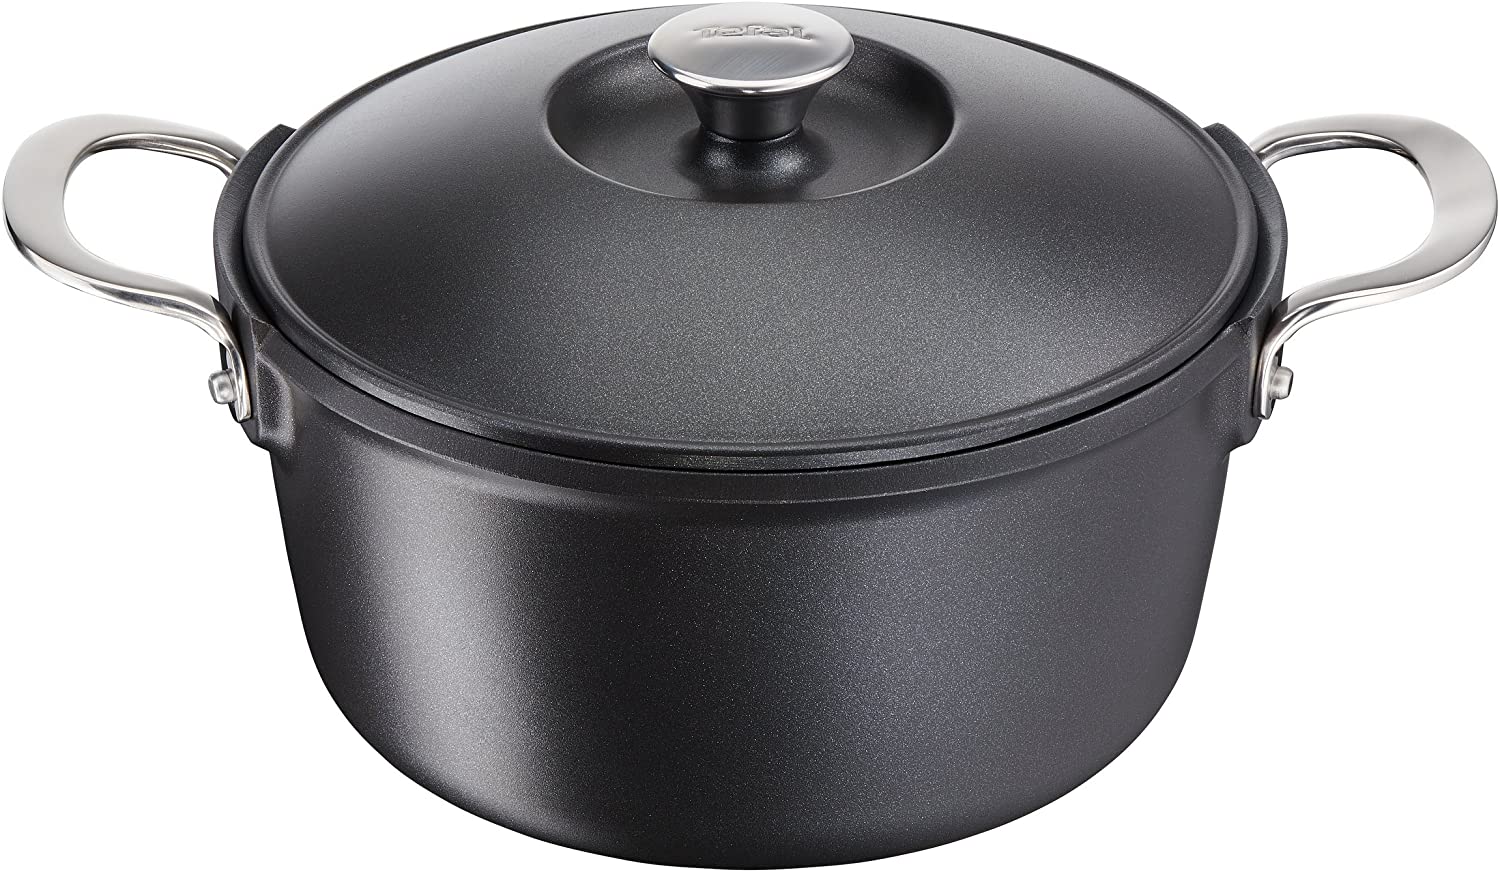 Tefal E2157014 Aroma Aluminium 4.8 L Suitable for All Cookers, Cast Iron Induction Casserole Dish, Black